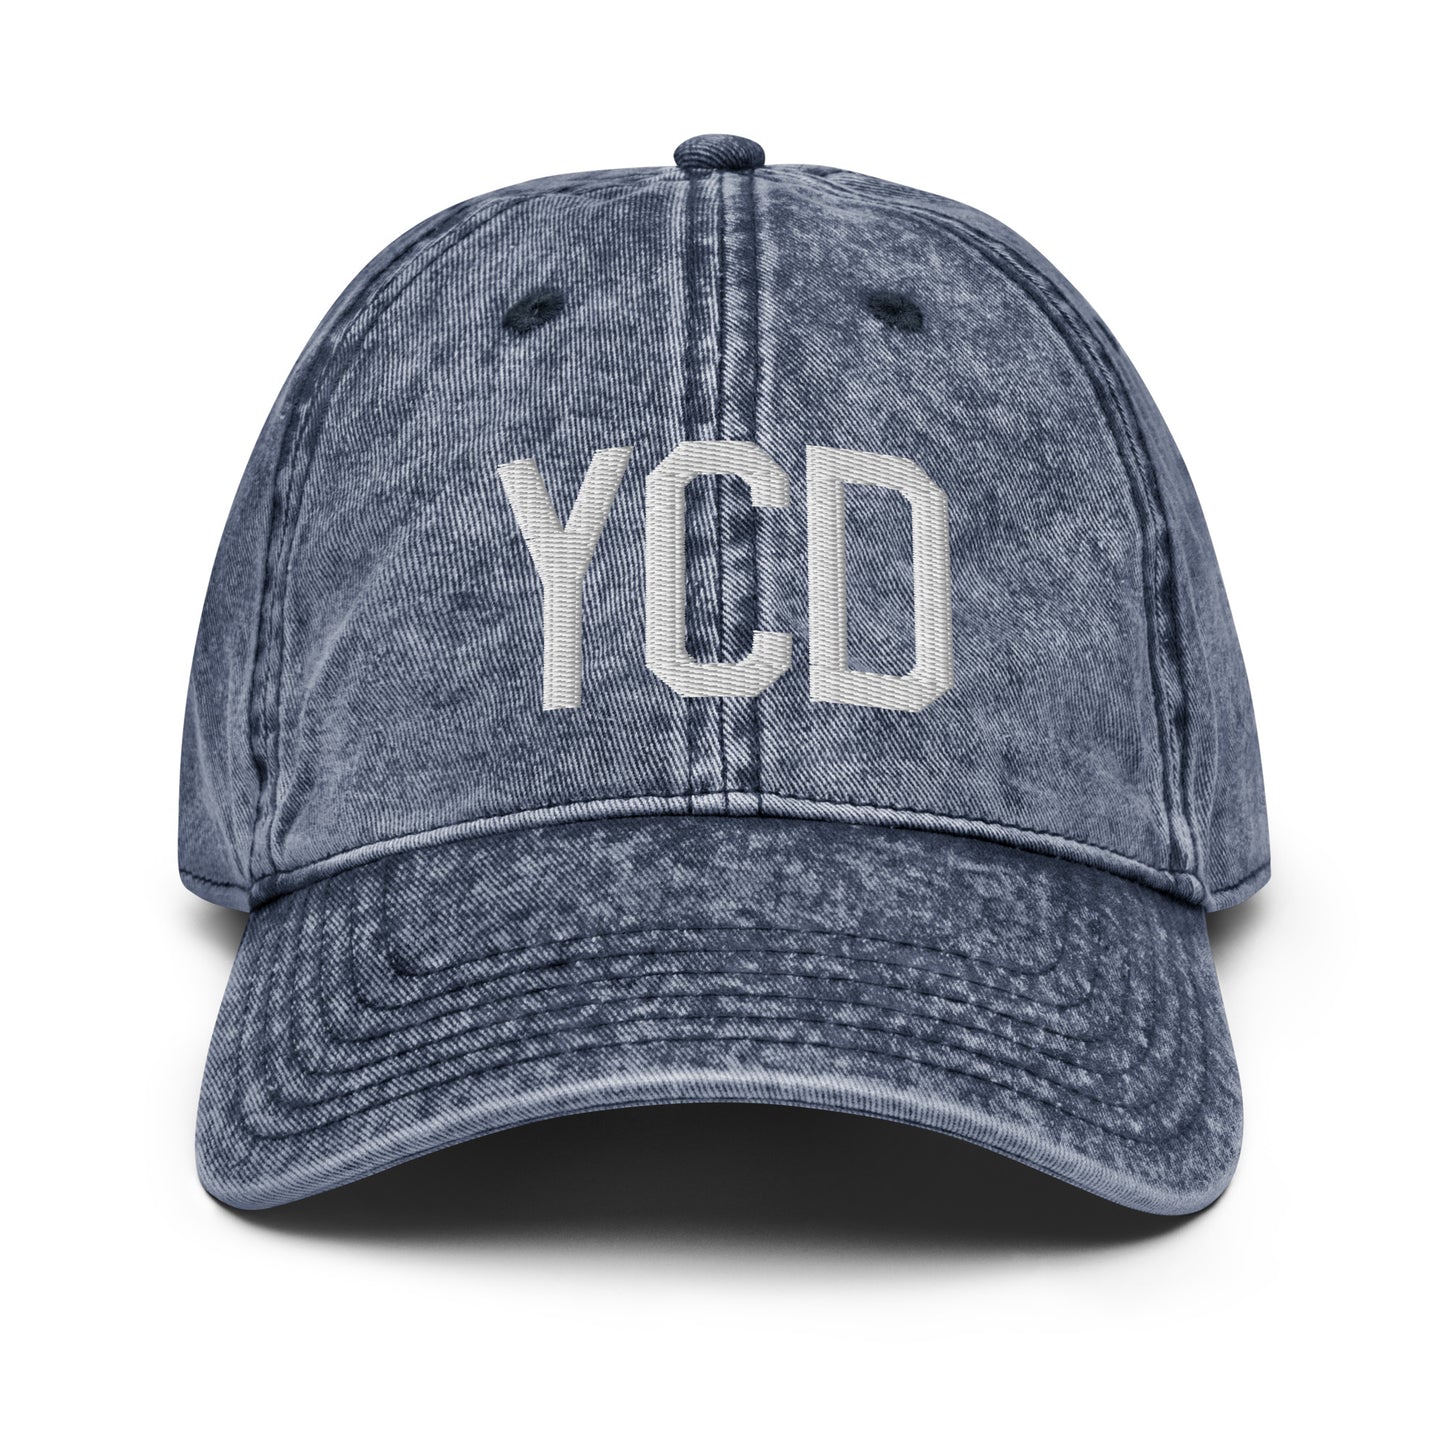 Airport Code Twill Cap - White • YCD Nanaimo • YHM Designs - Image 16